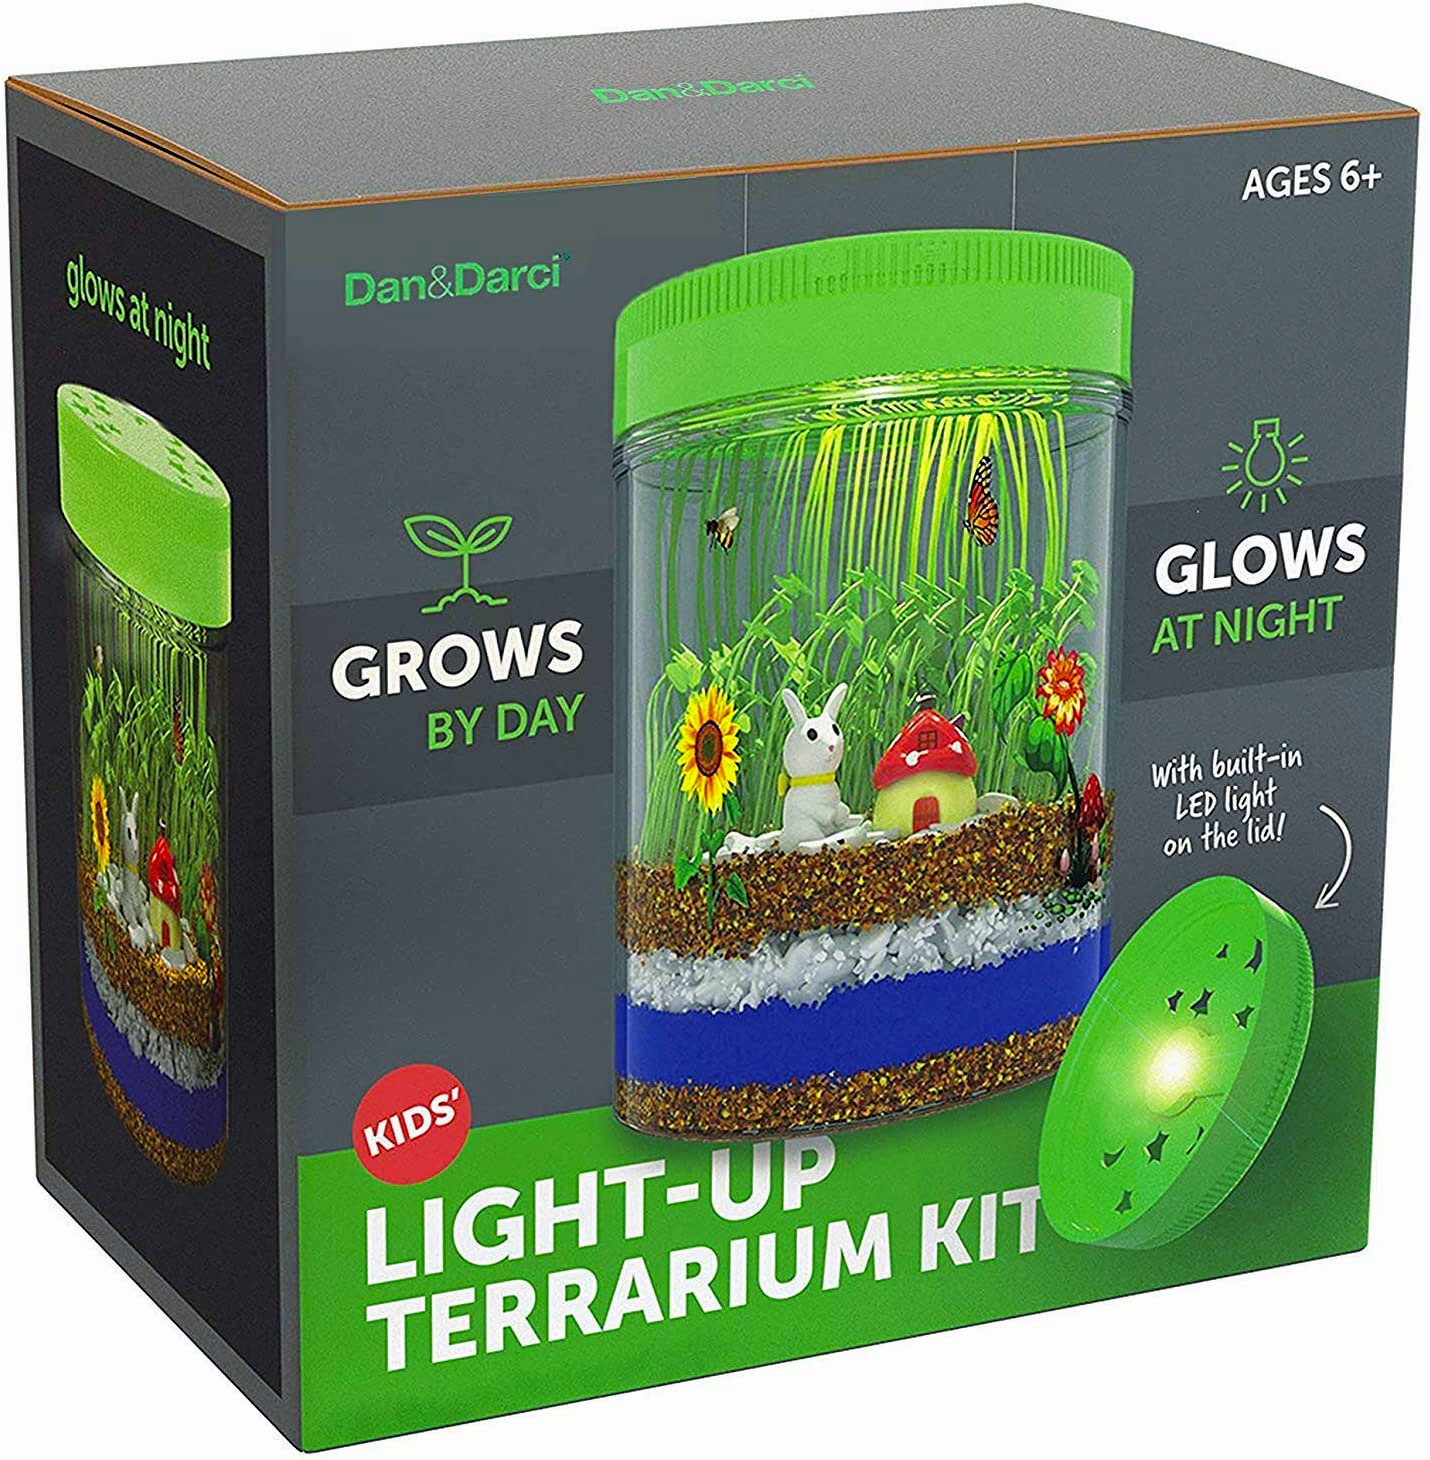 Light-up Terrarium Kit for Kids with LED Light on Lid - Create Your Own Customized Mini Garden in a Jar That Glows at Night - Science Kits for Boys & Girls - Gardening Gifts for Kids - Children Toys - image 1 of 9